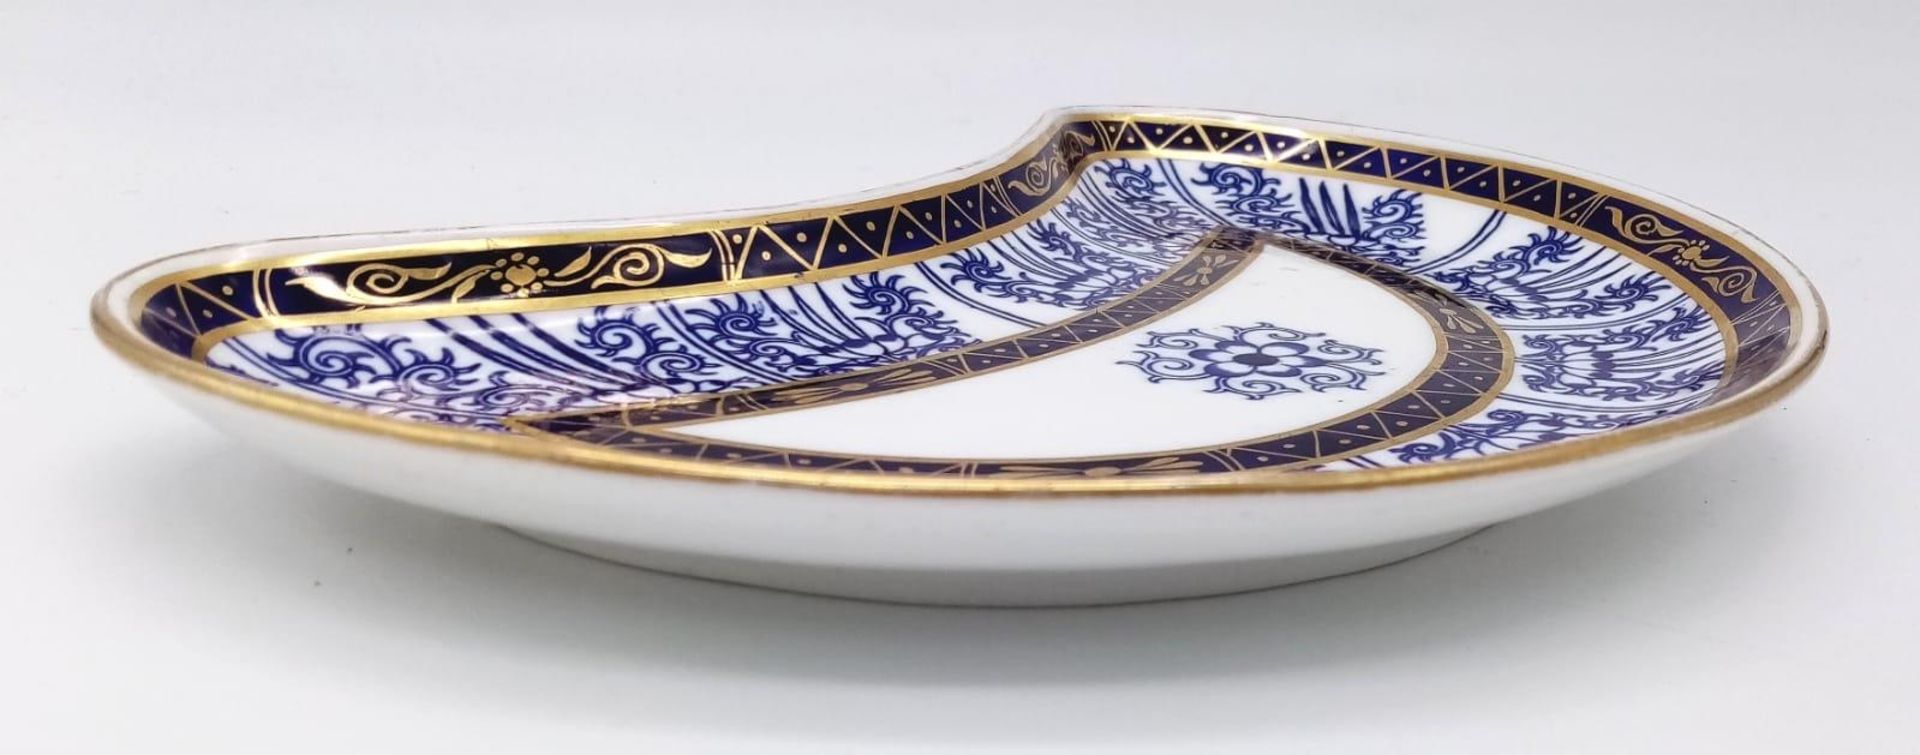 A Royal Worcester, Lily Pattern, Antique Kidney Server Dish. Wonderful deep blue offset by gold - Image 3 of 4